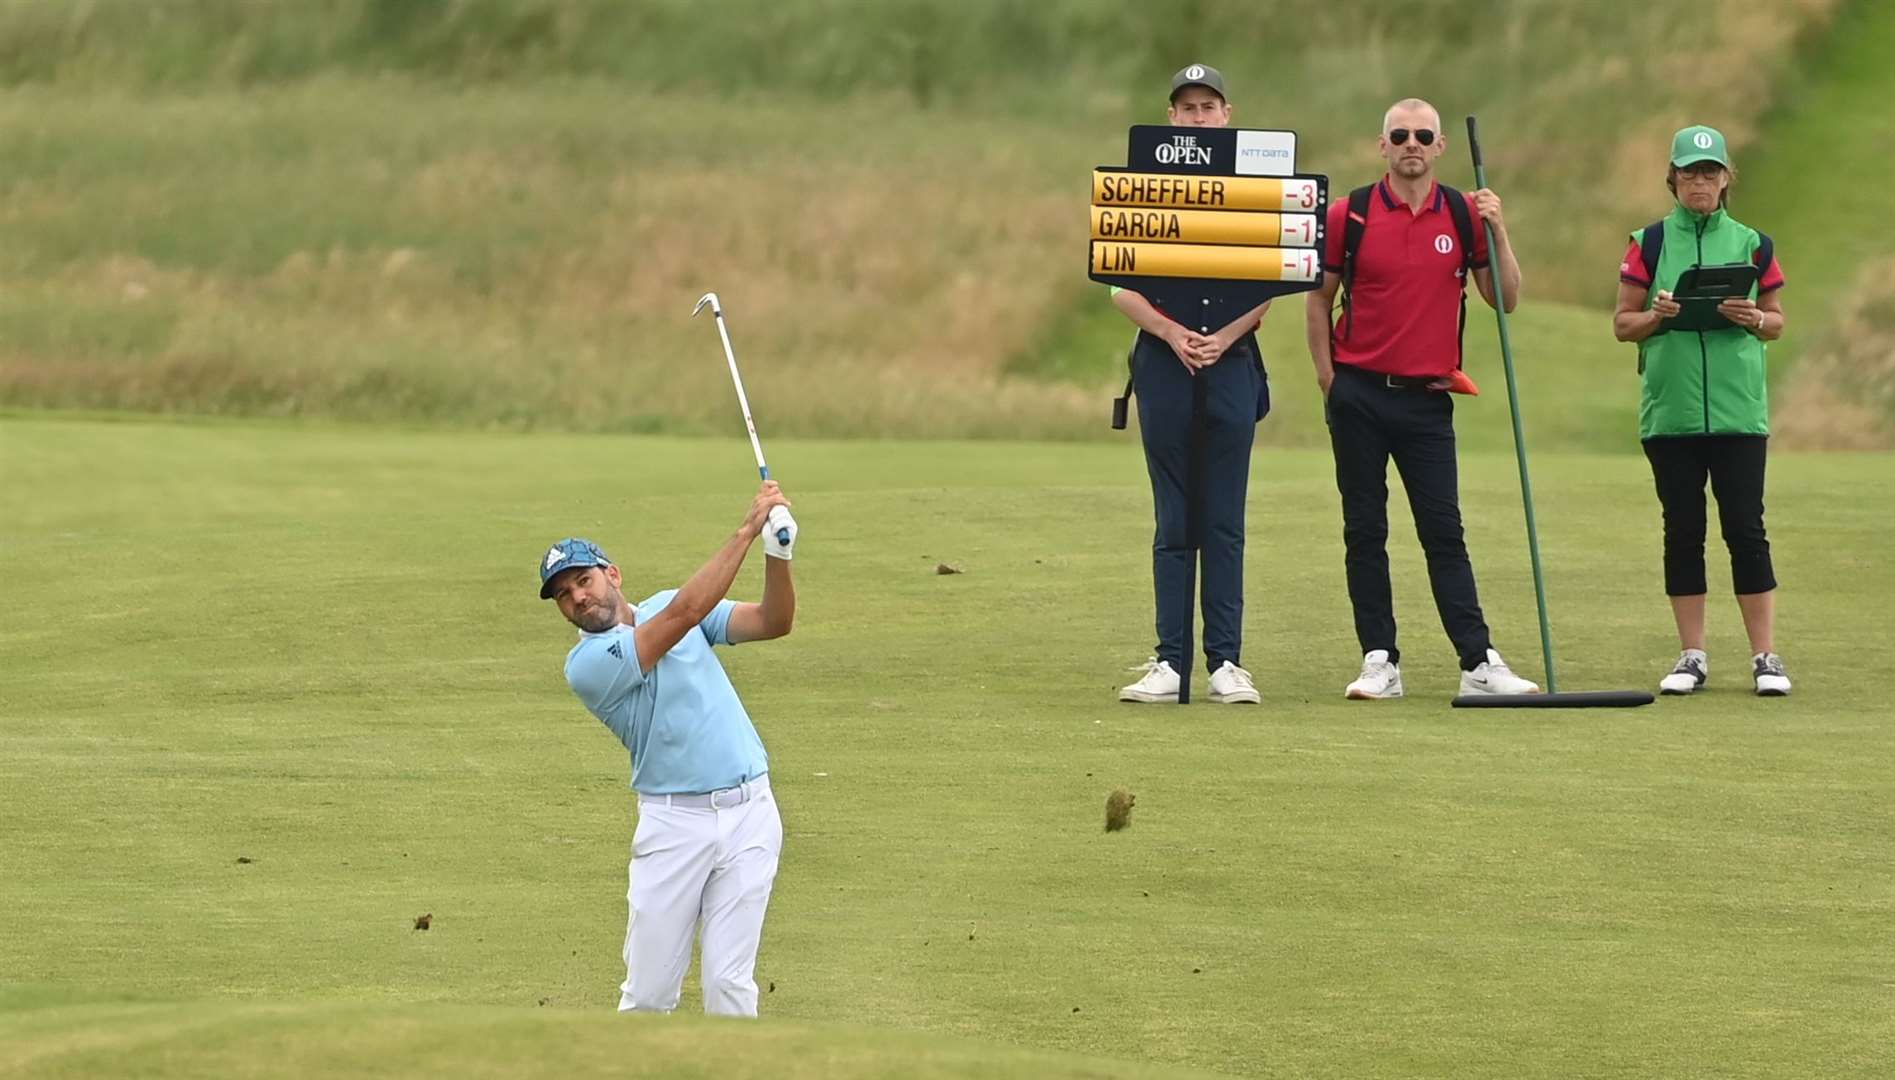 Competitor Sergio Garcia. at the 149th Open, golf tournament in Sandwich last July. Picture: Barry Goodwin